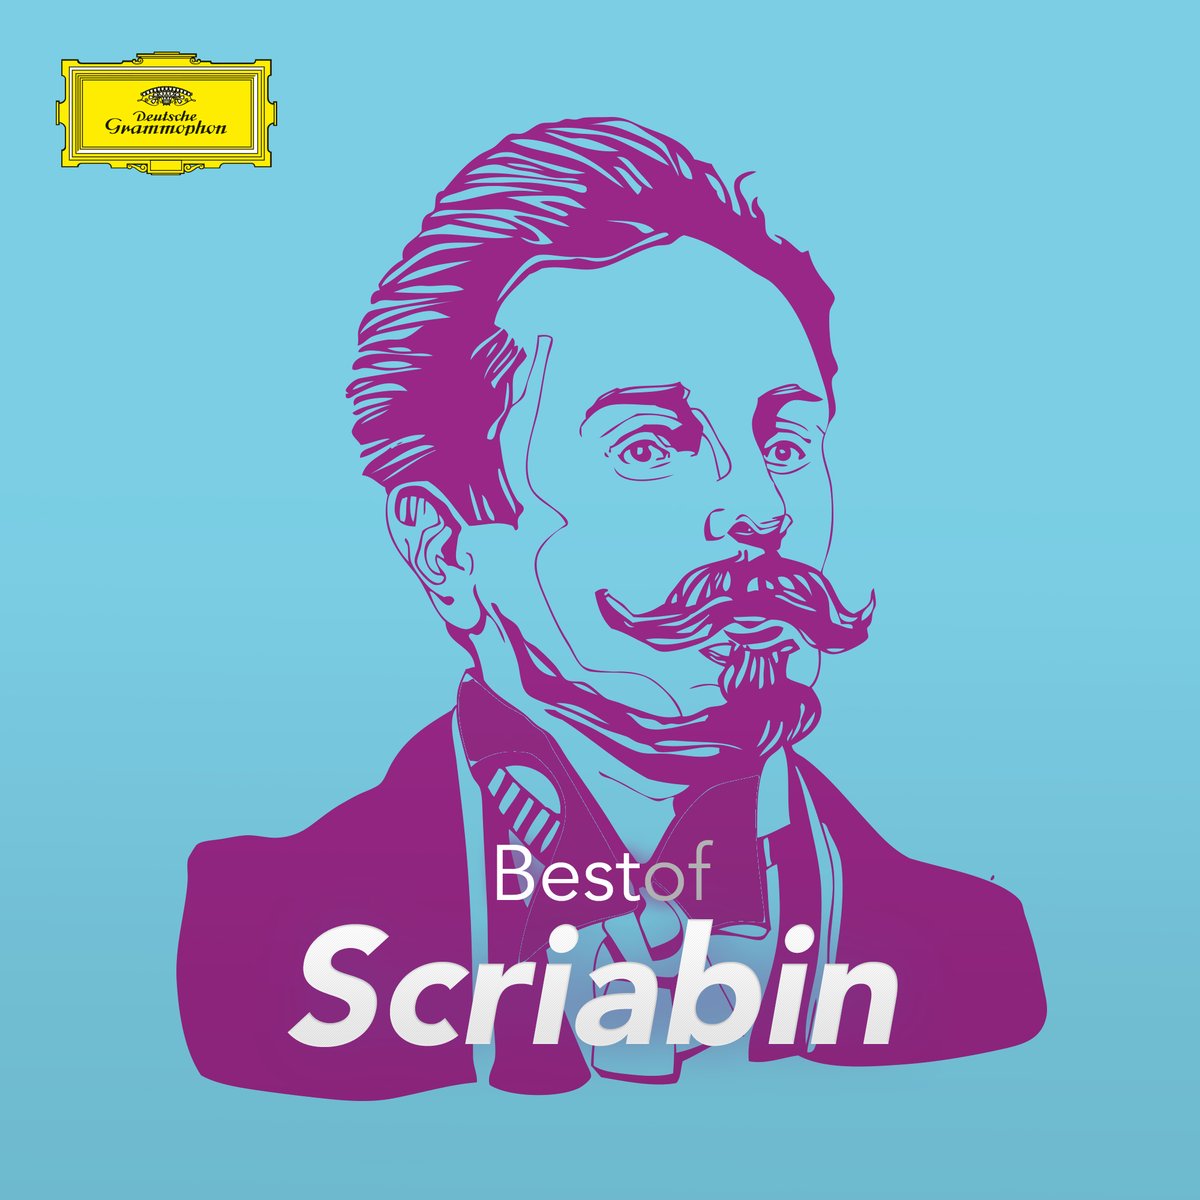 Scriabin composed uniquely lyrical, voluptuously overheated piano and orchestral music. To commemorate his passing #onthisday in 1915, discover a selection of his works, featuring a few @juliusasal interpretations 🎧 → DG.lnk.to/Scriabin